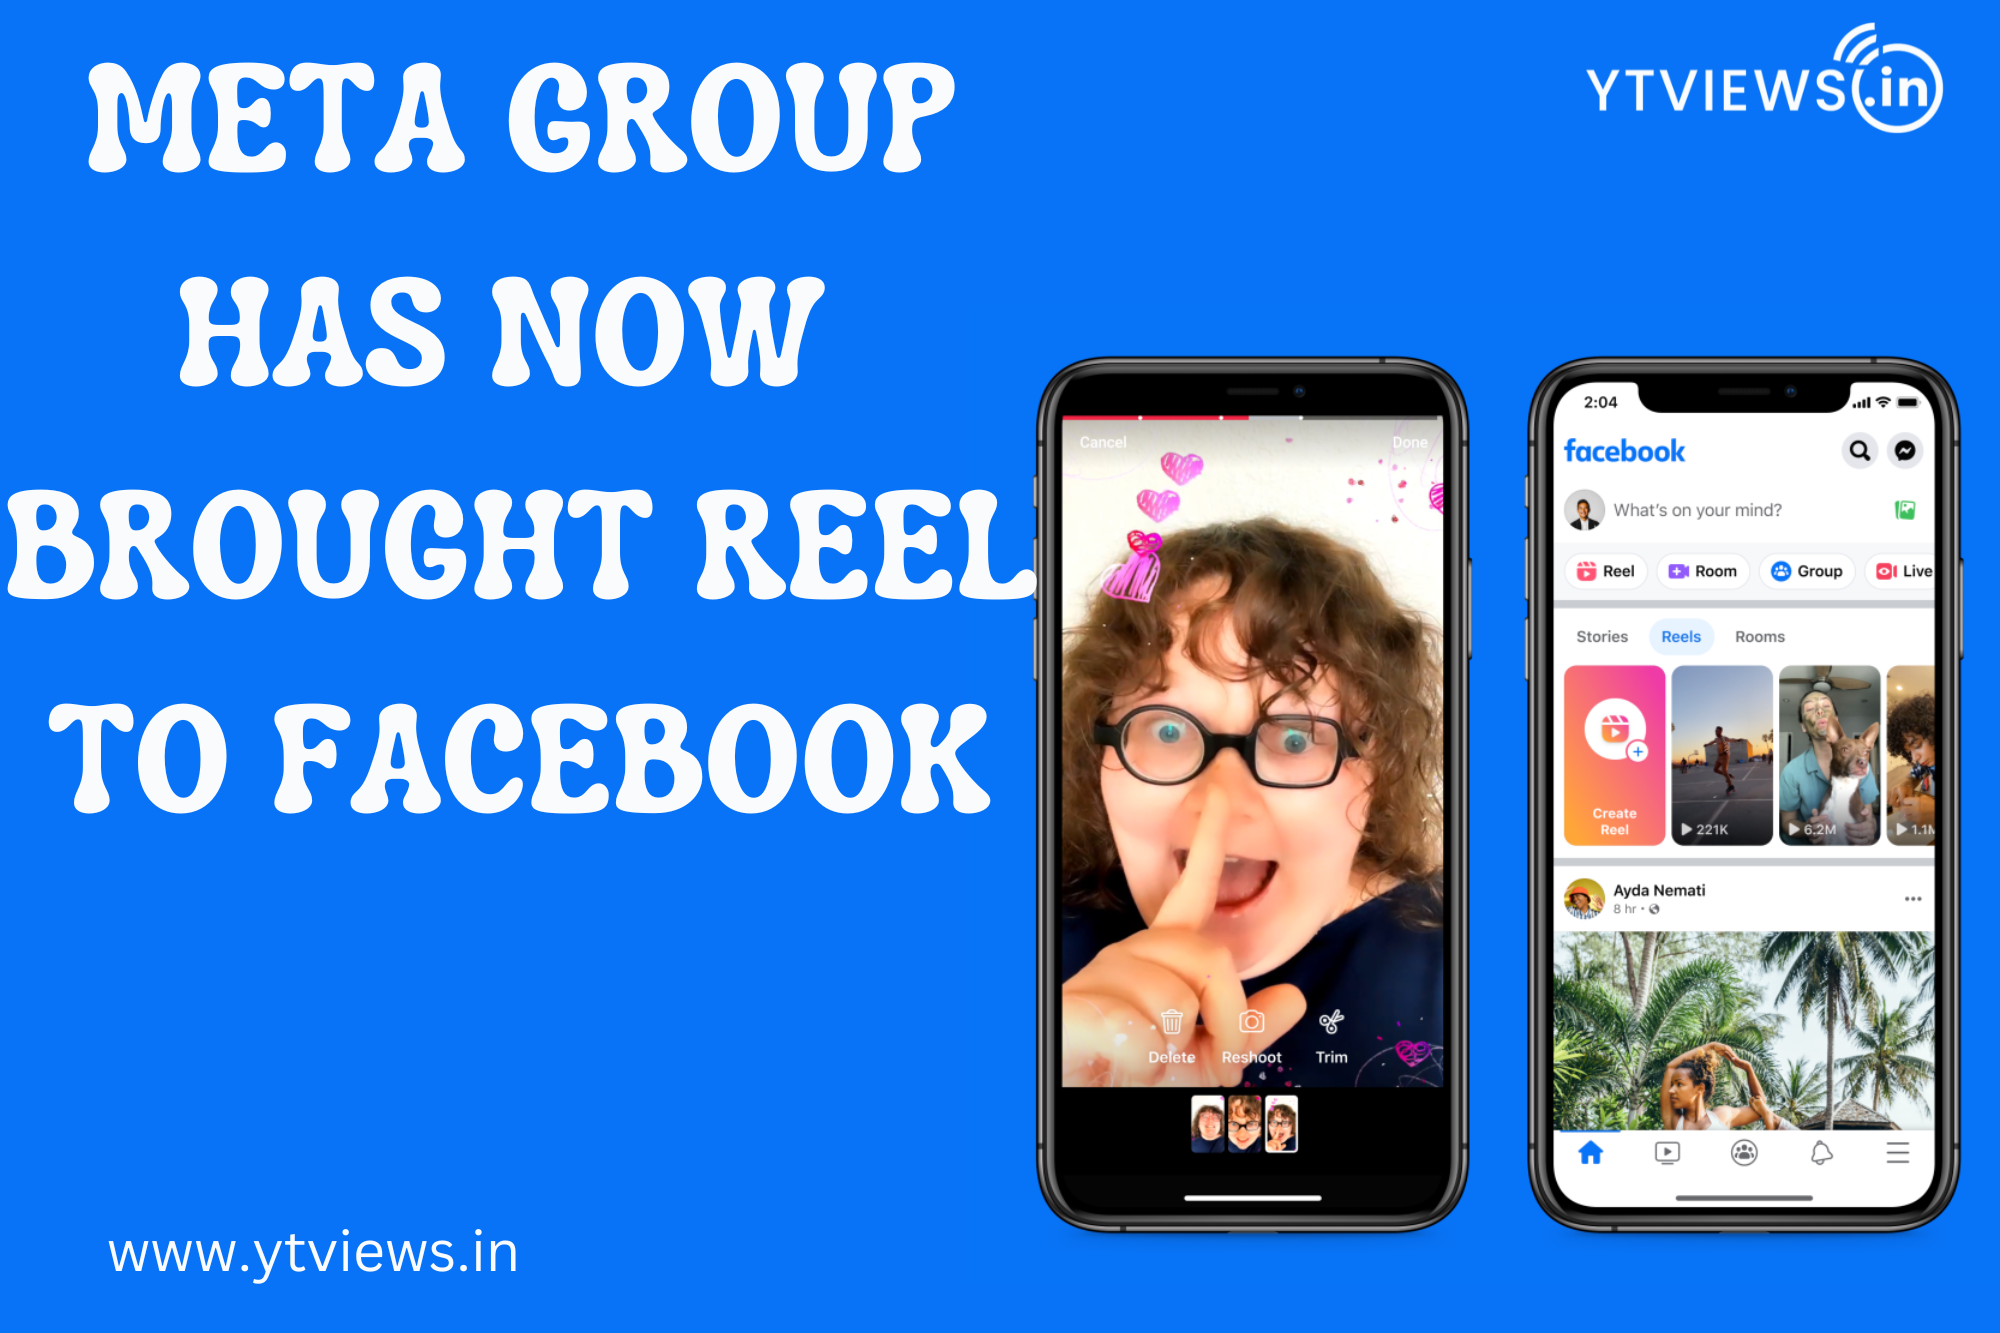 Meta group has now brought reels to Facebook